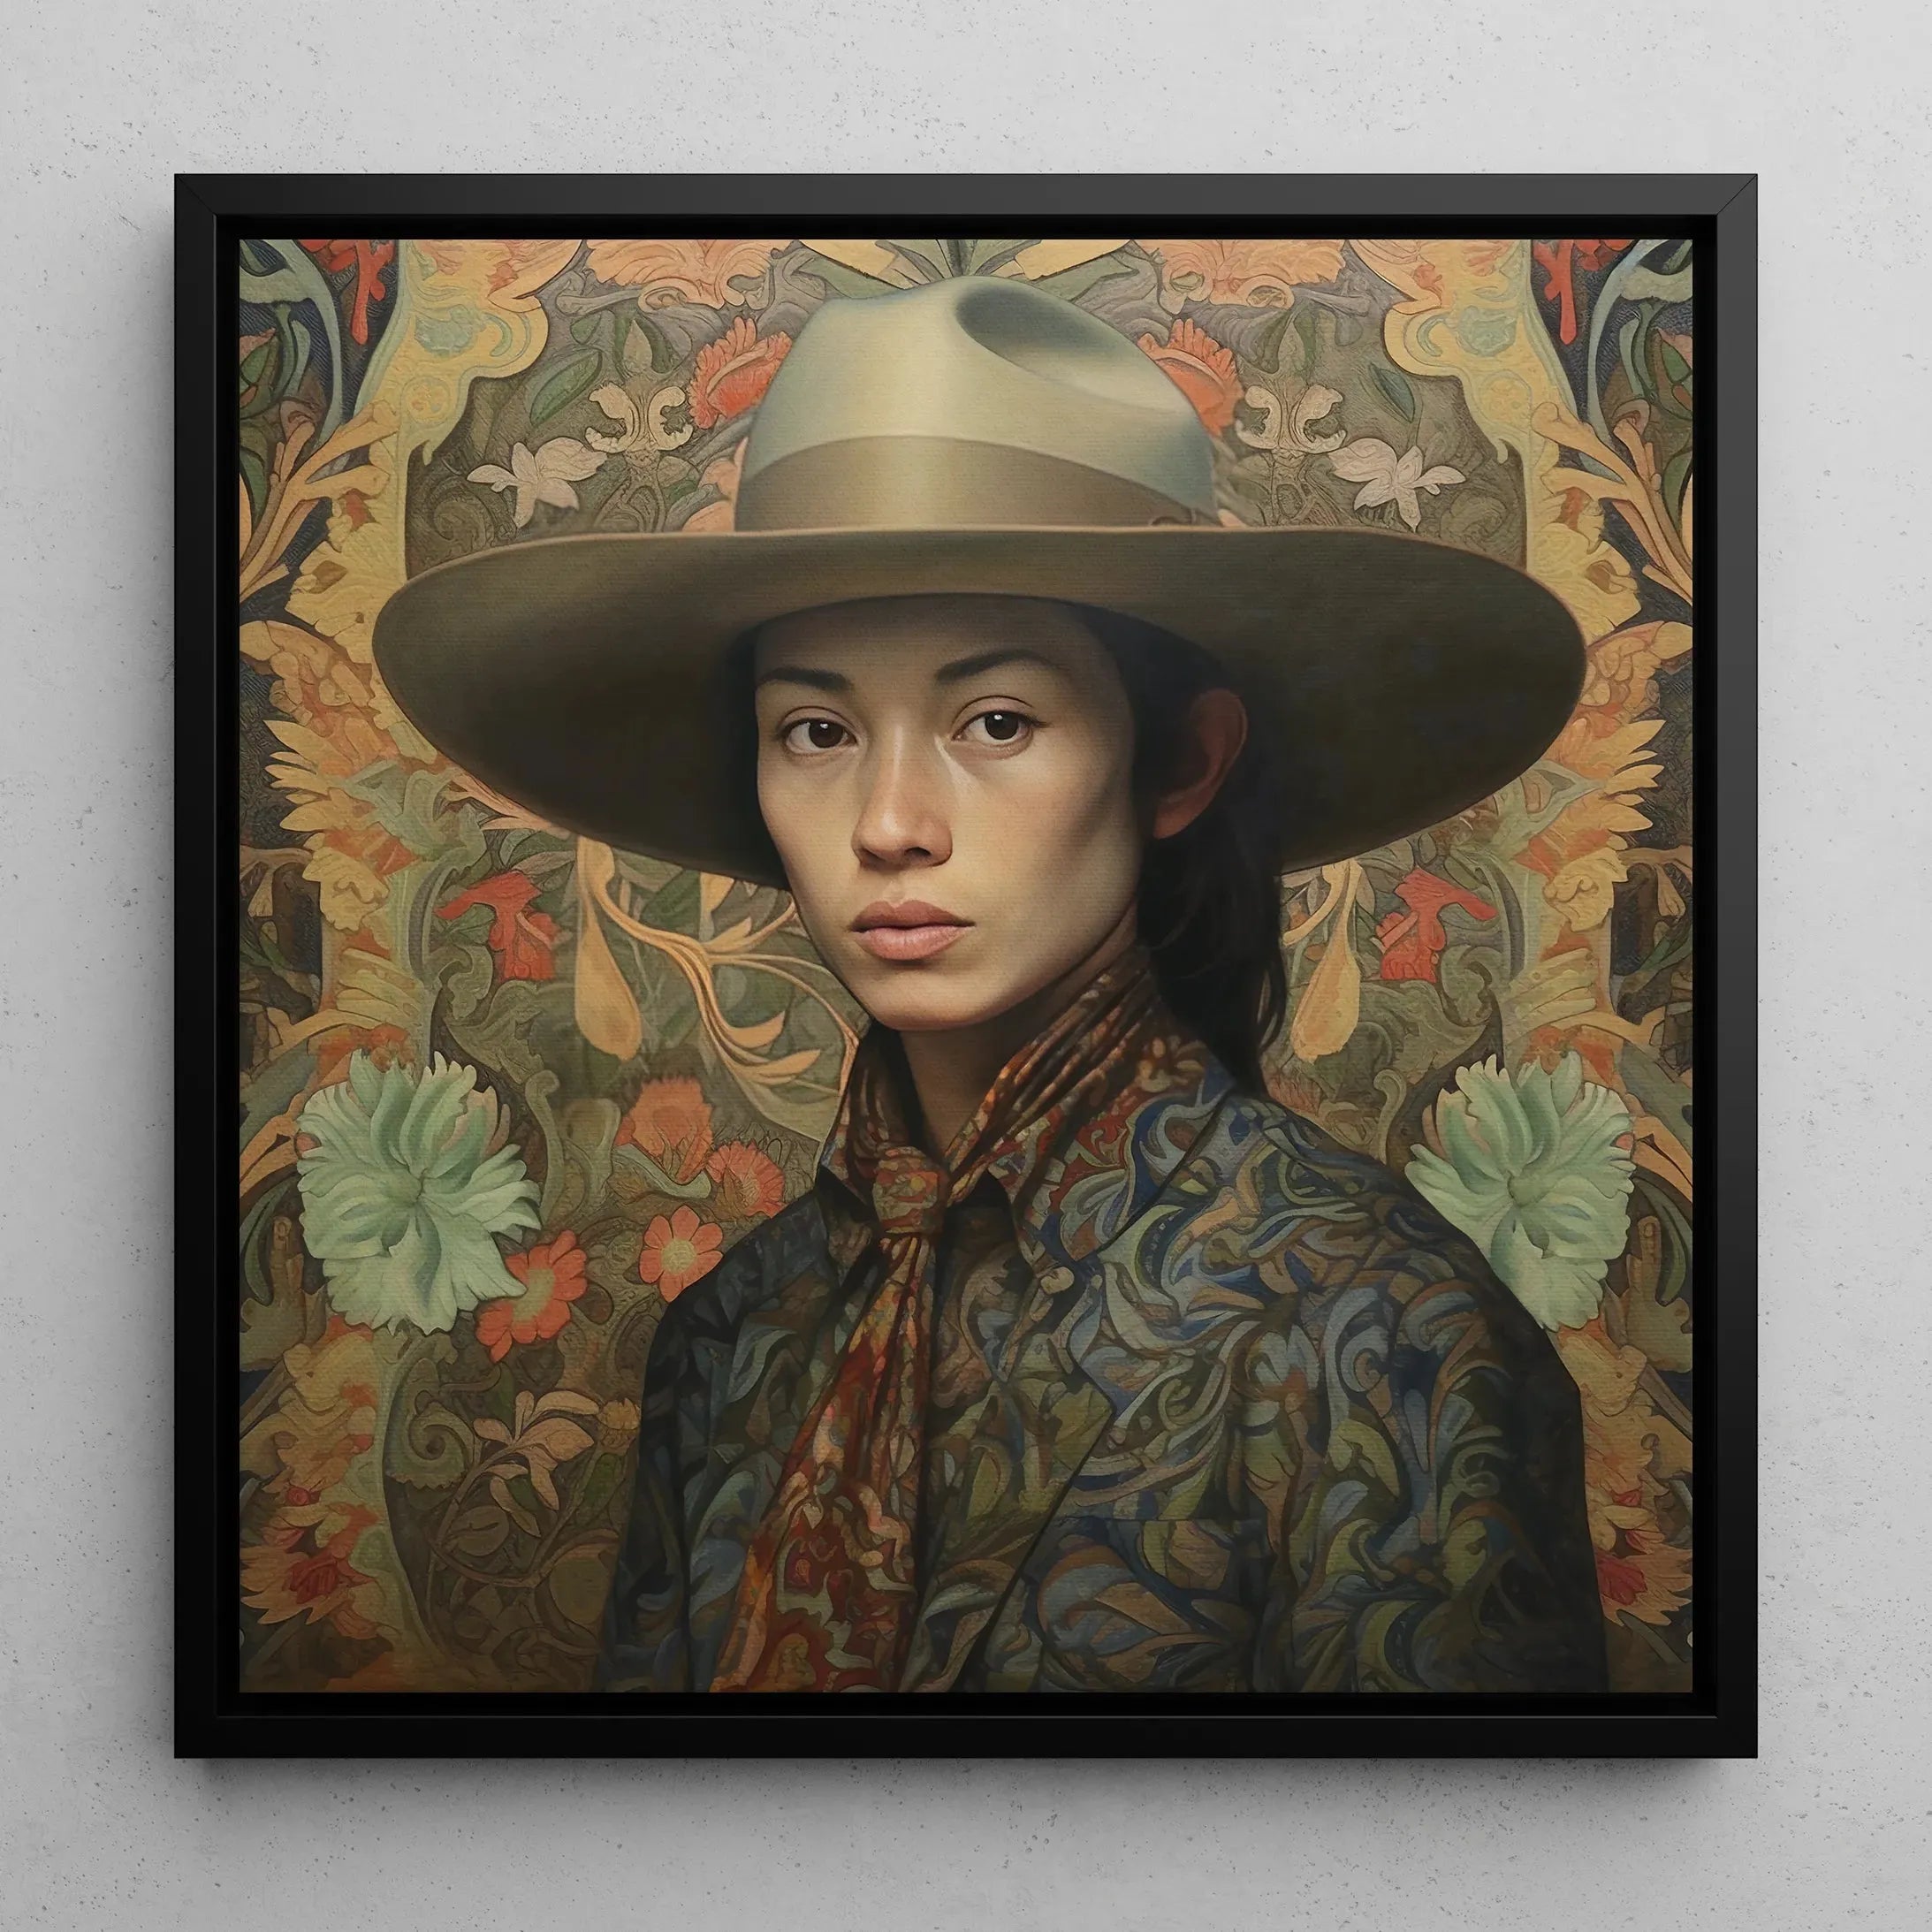 Fulin - Gaysian Chinese Cowboy Dandy Float Frame Canvas - 16’x16’ - Posters Prints & Visual Artwork - Aesthetic Art